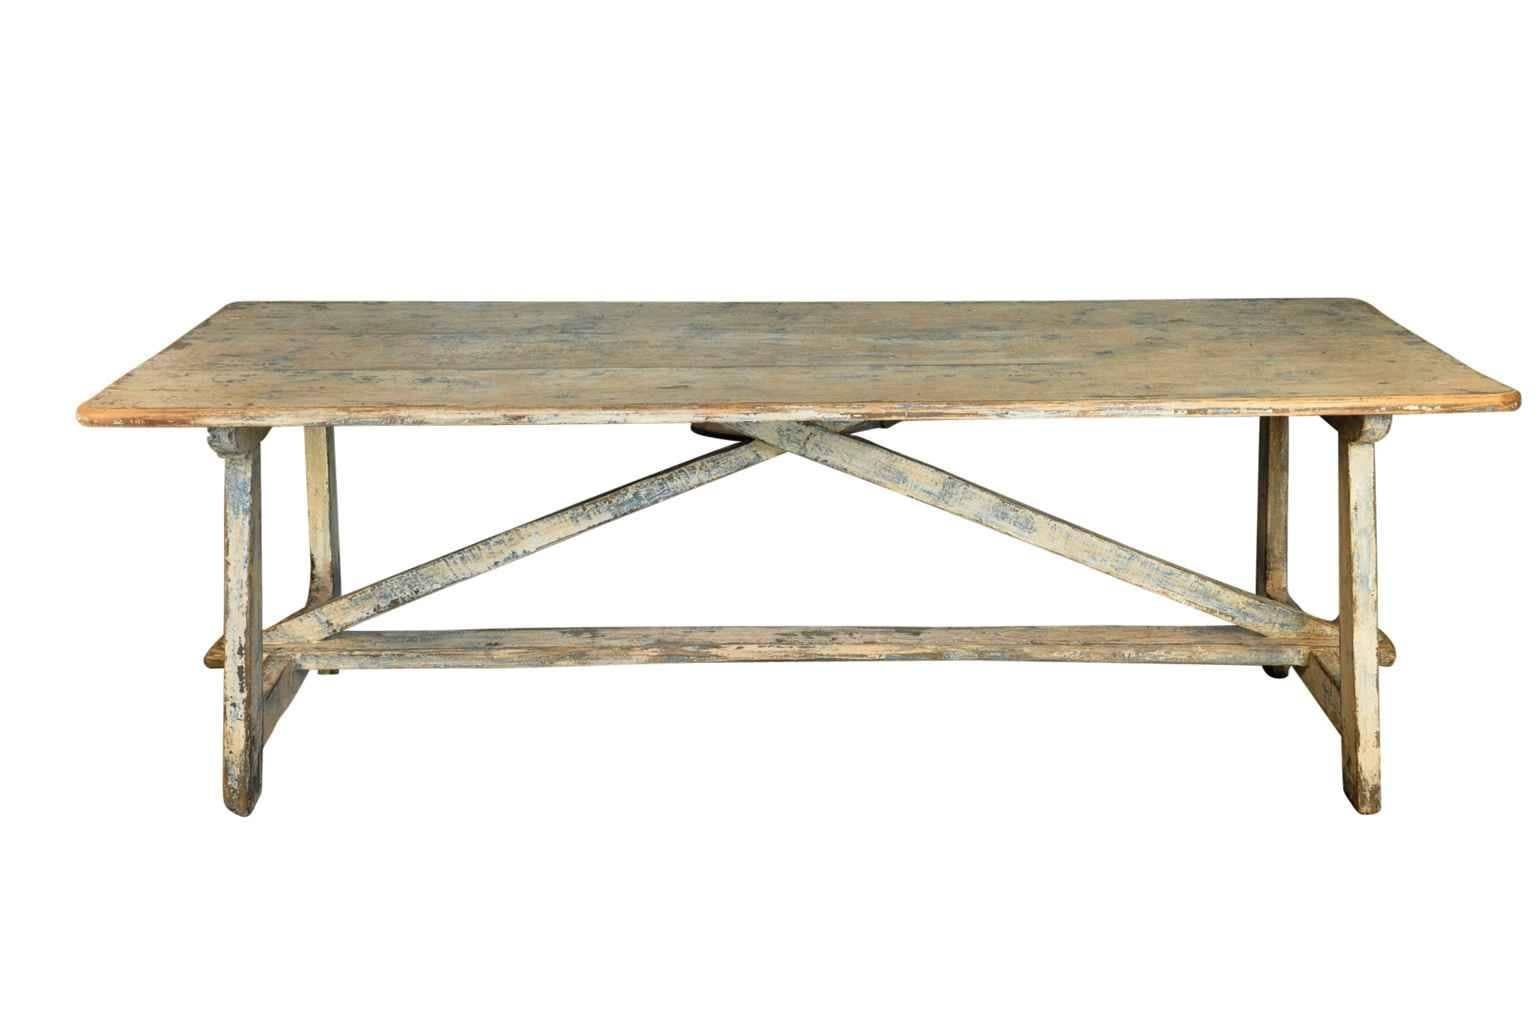 A wonderful mid-19th century farm table - trestle table from the Catalan region of Spain.  Very sound and sturdy construction.  The table has a lovely patina and a rich painted finish is in shades of off-white with under coats a blue.